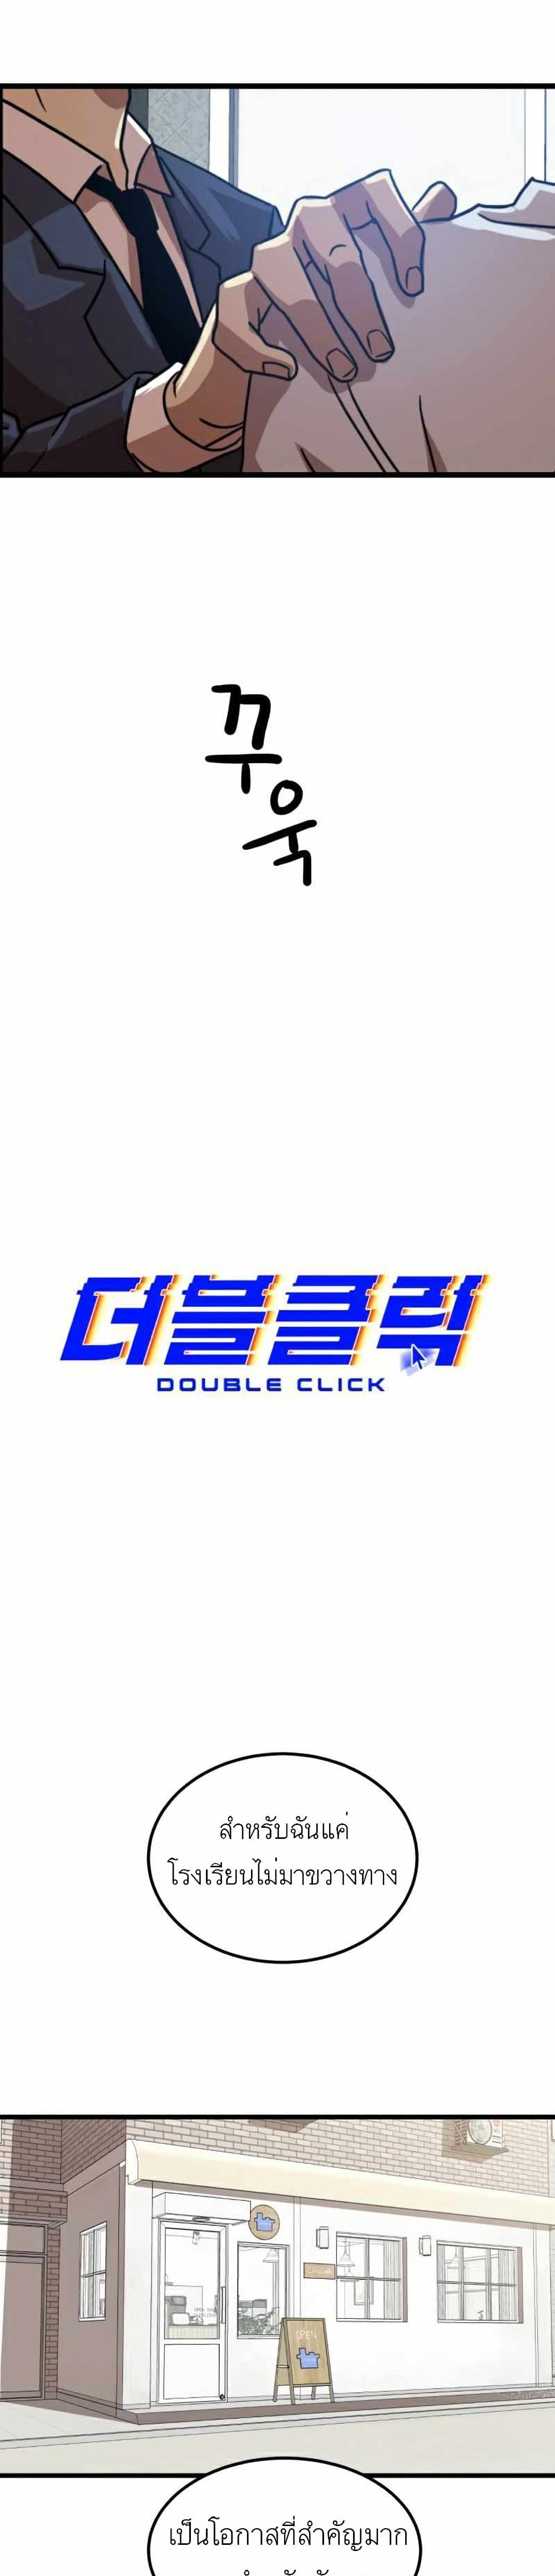 Double Click 38 10